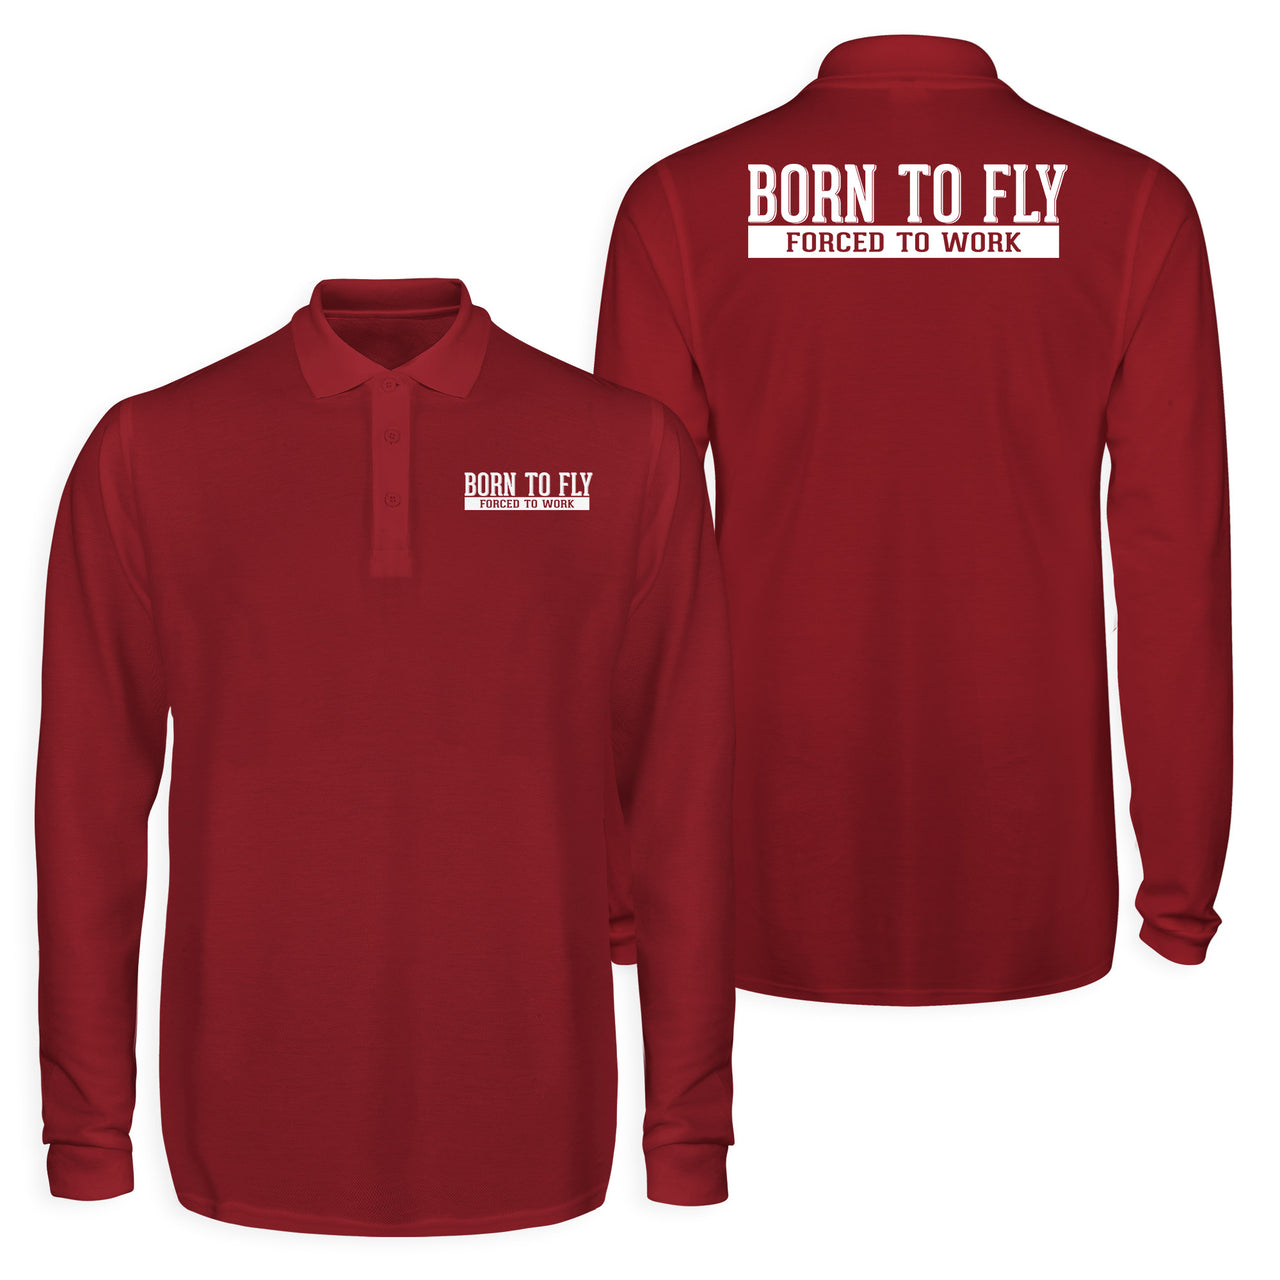 Born To Fly Forced To Work Designed Long Sleeve Polo T-Shirts (Double-Side)